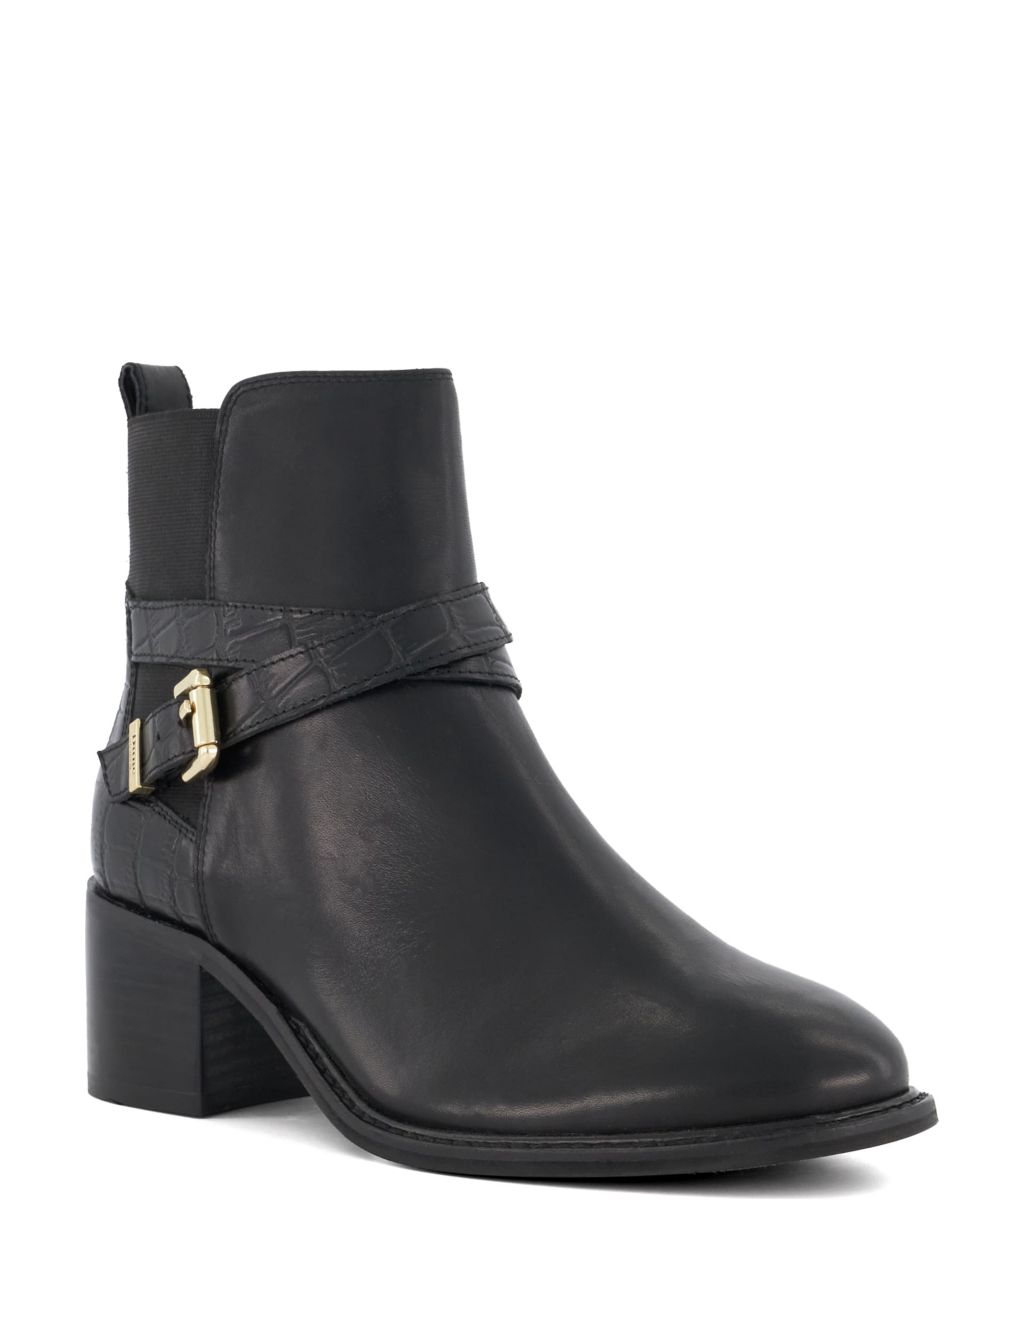 Leather Buckle Block Heel Ankle Boots image 2